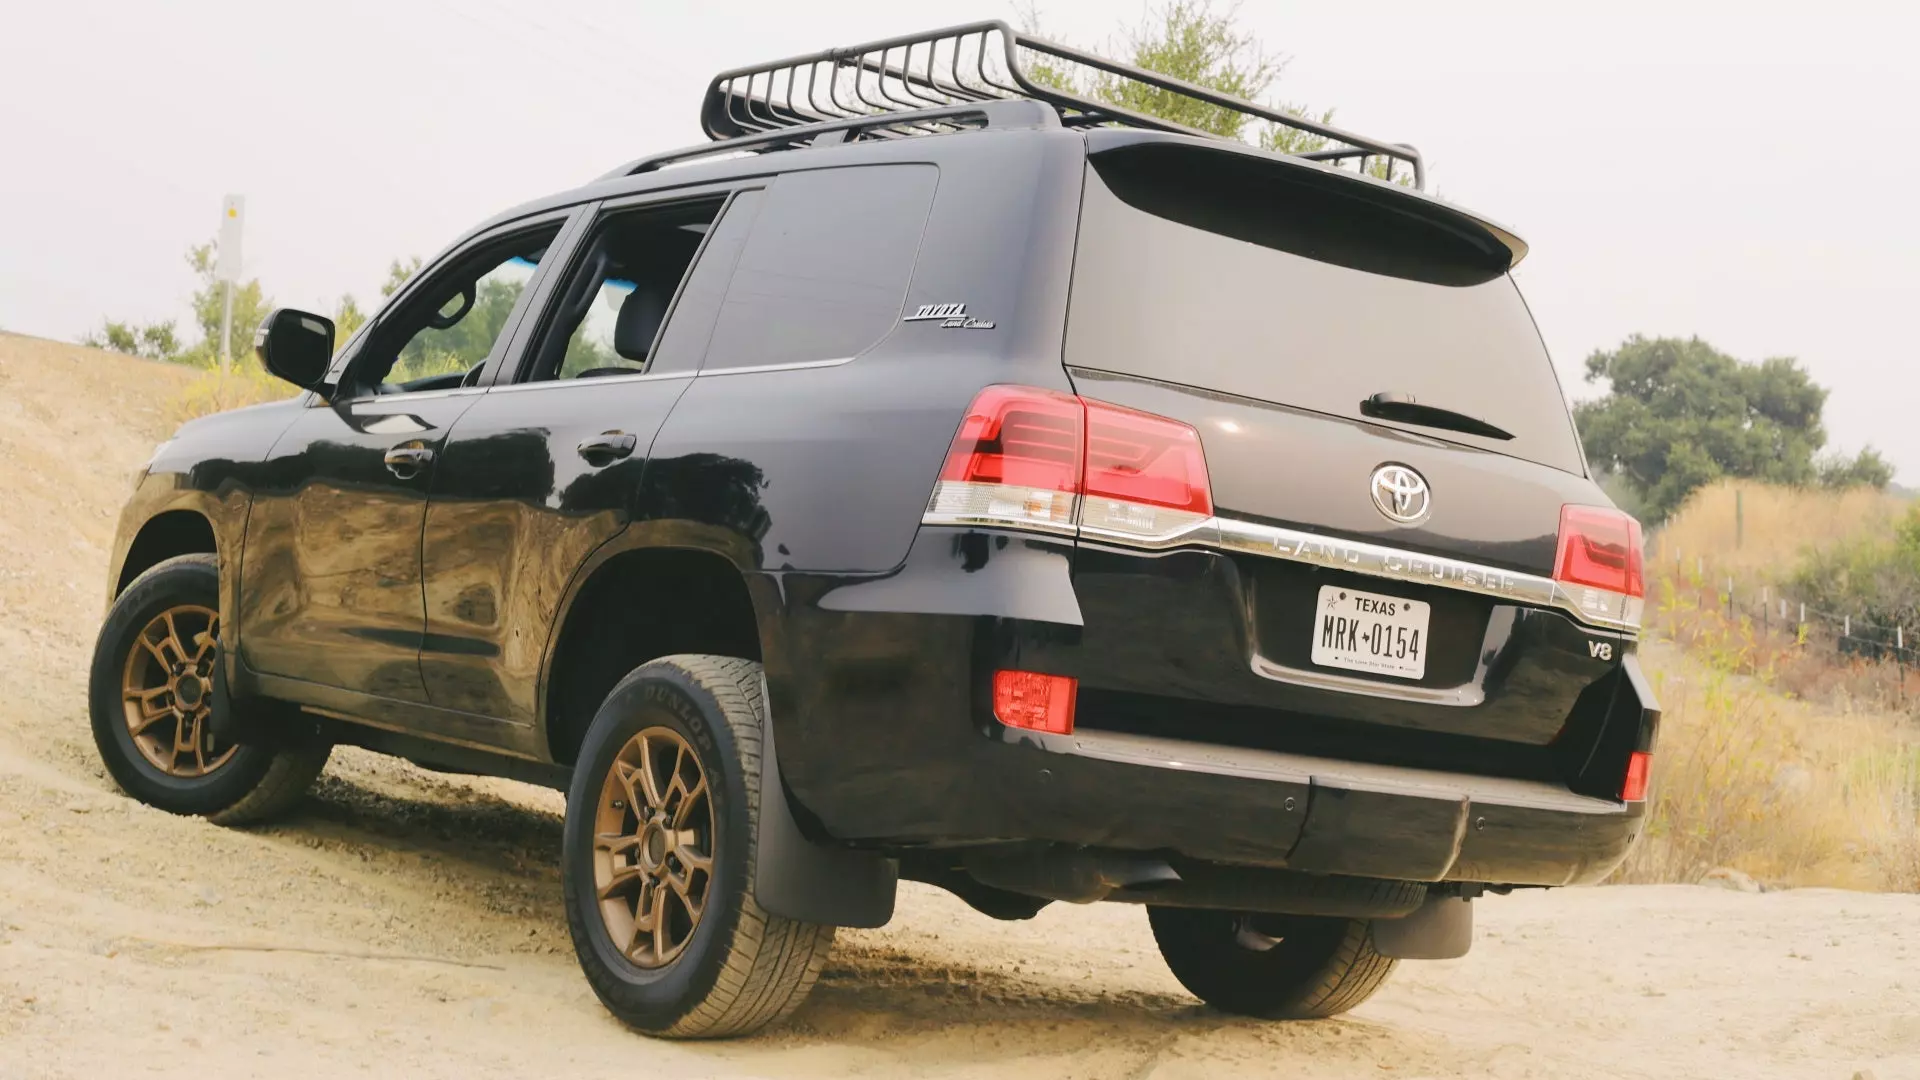 The J200 Toyota Land Cruiser Taught Me That Off-Roaders Are Just As Fun As Sports Cars | Autance